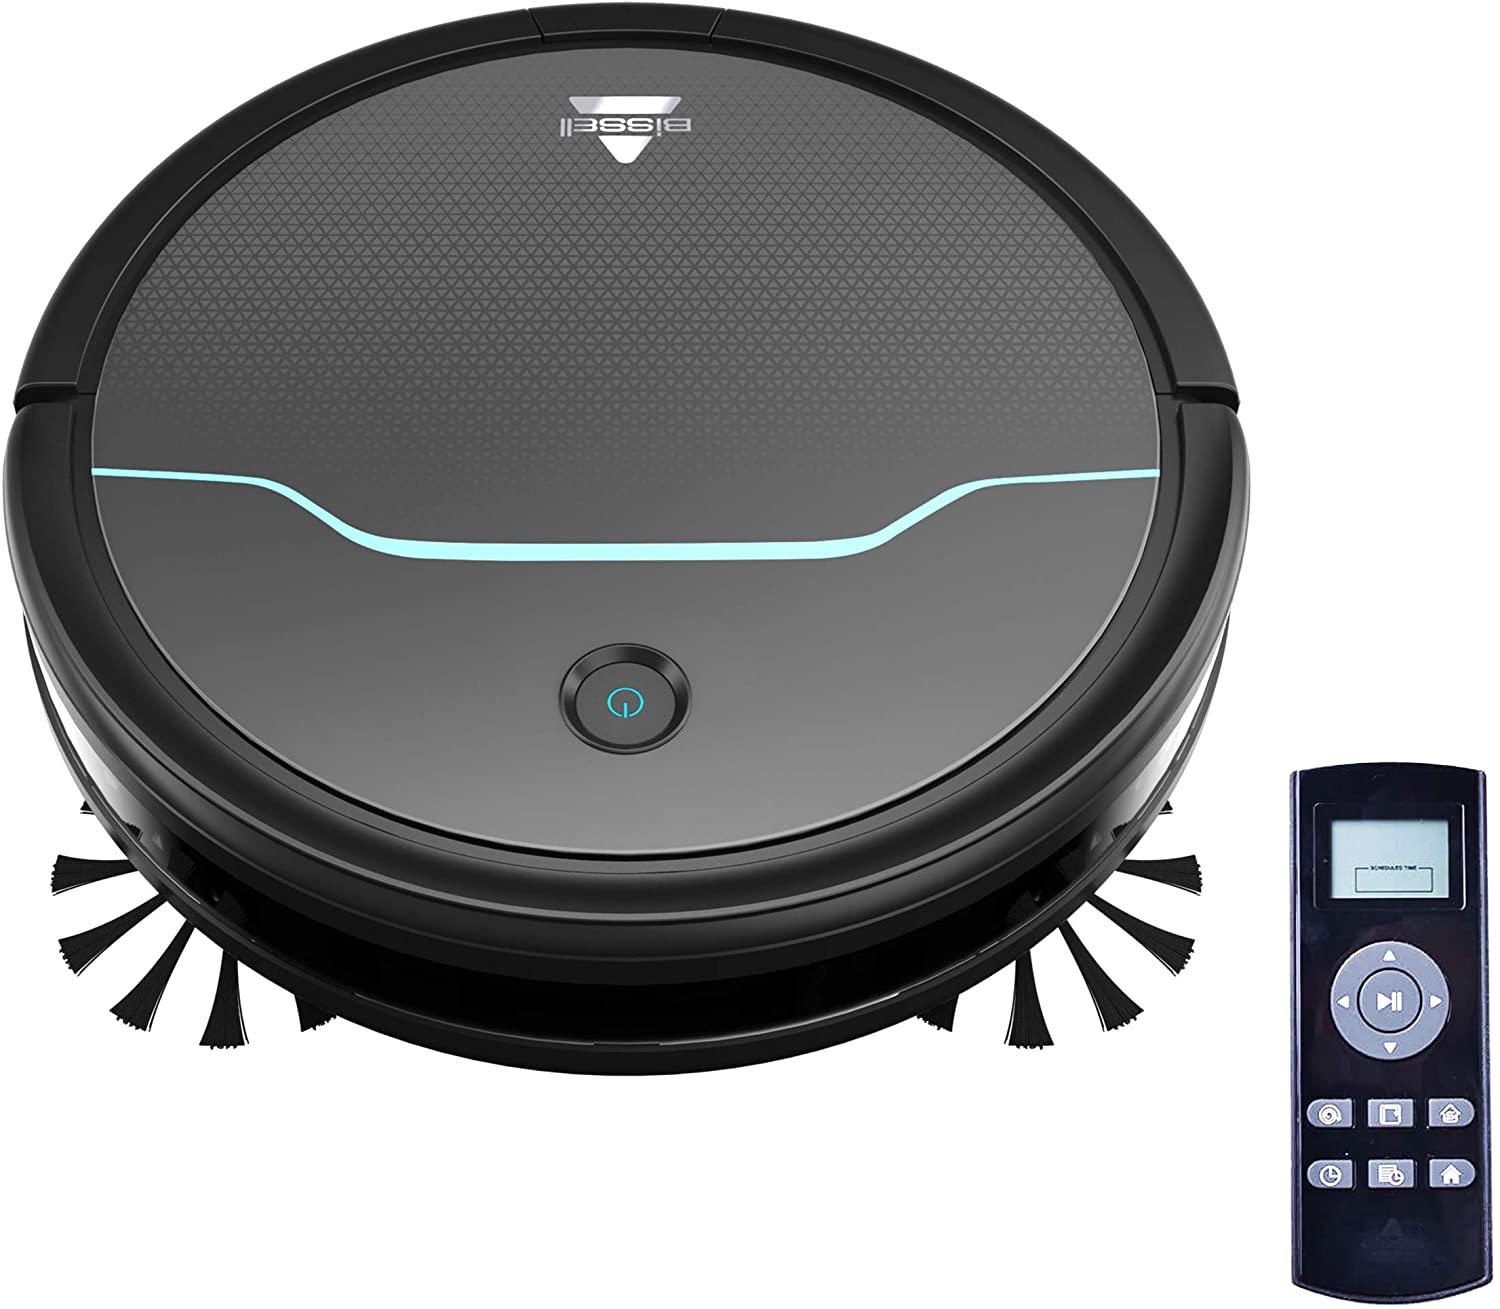 Bissell EV675 Robot Vacuum Cleaner for $169.99 Shipped